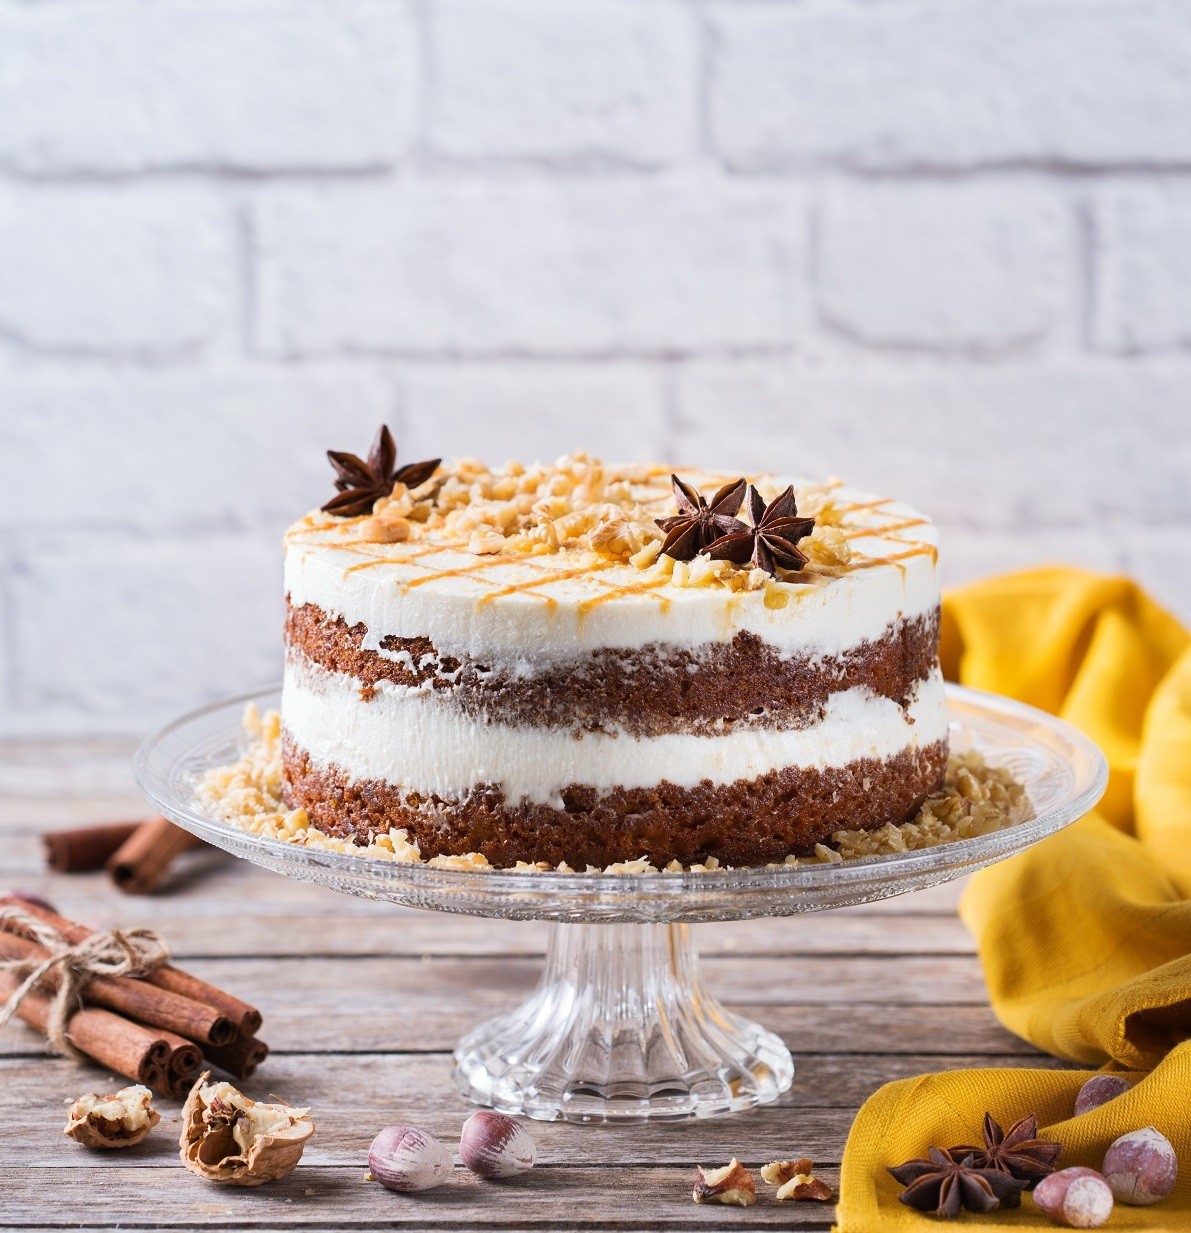 Homemade easter carrot cake with walnuts, nuts, spices